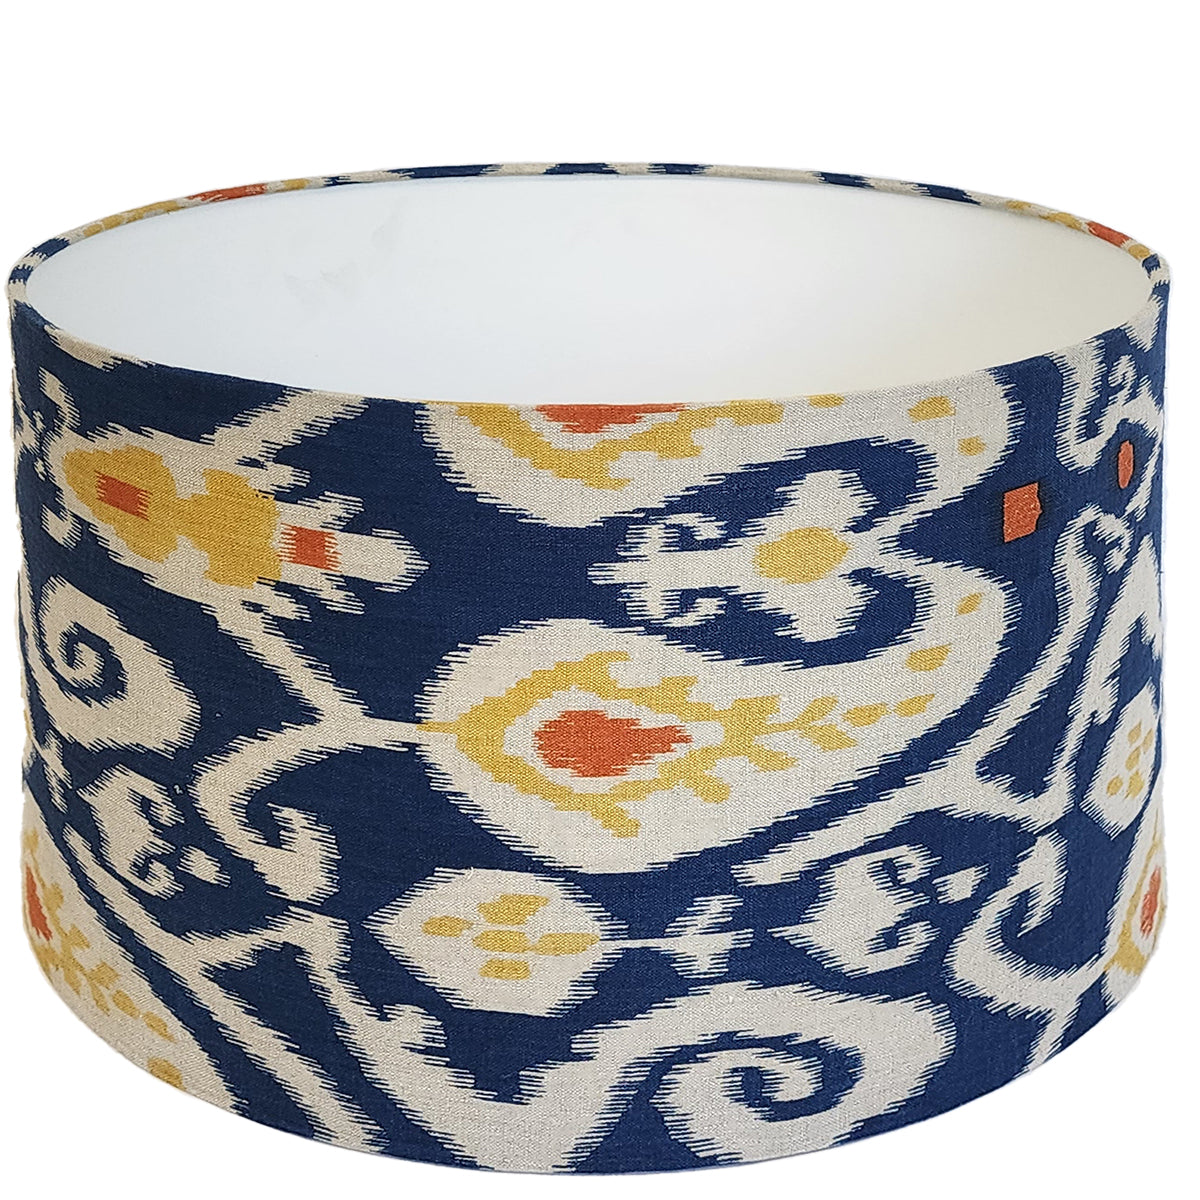 Indonesian Ikat style linen lampshade - blue